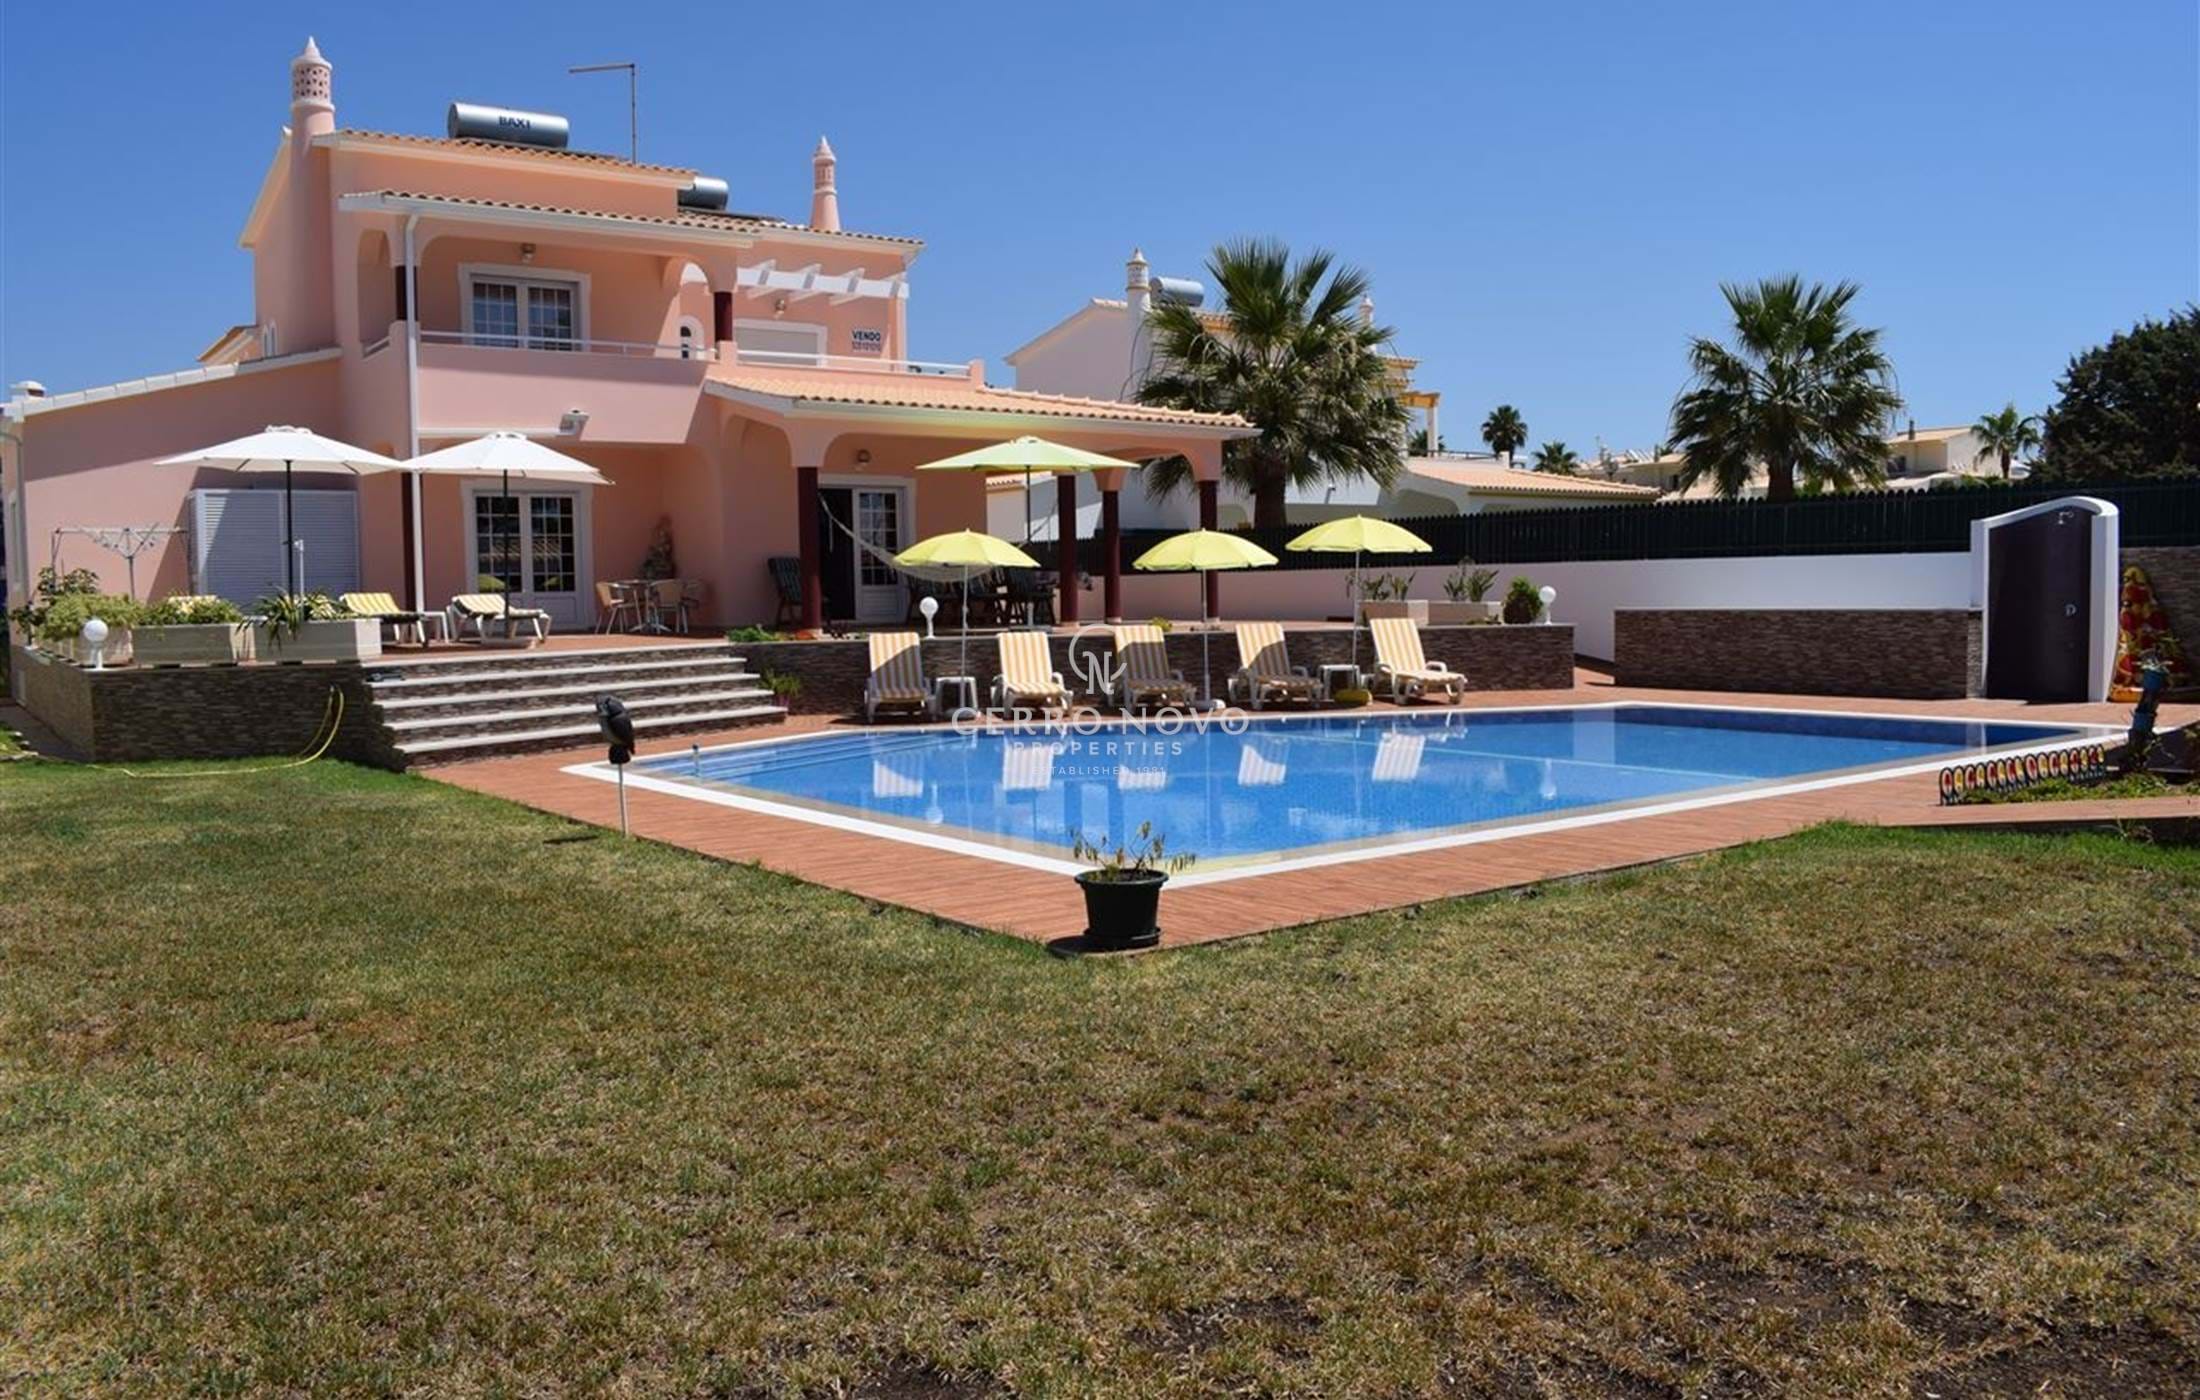 Detached villa with private pool 100 metres from the beach